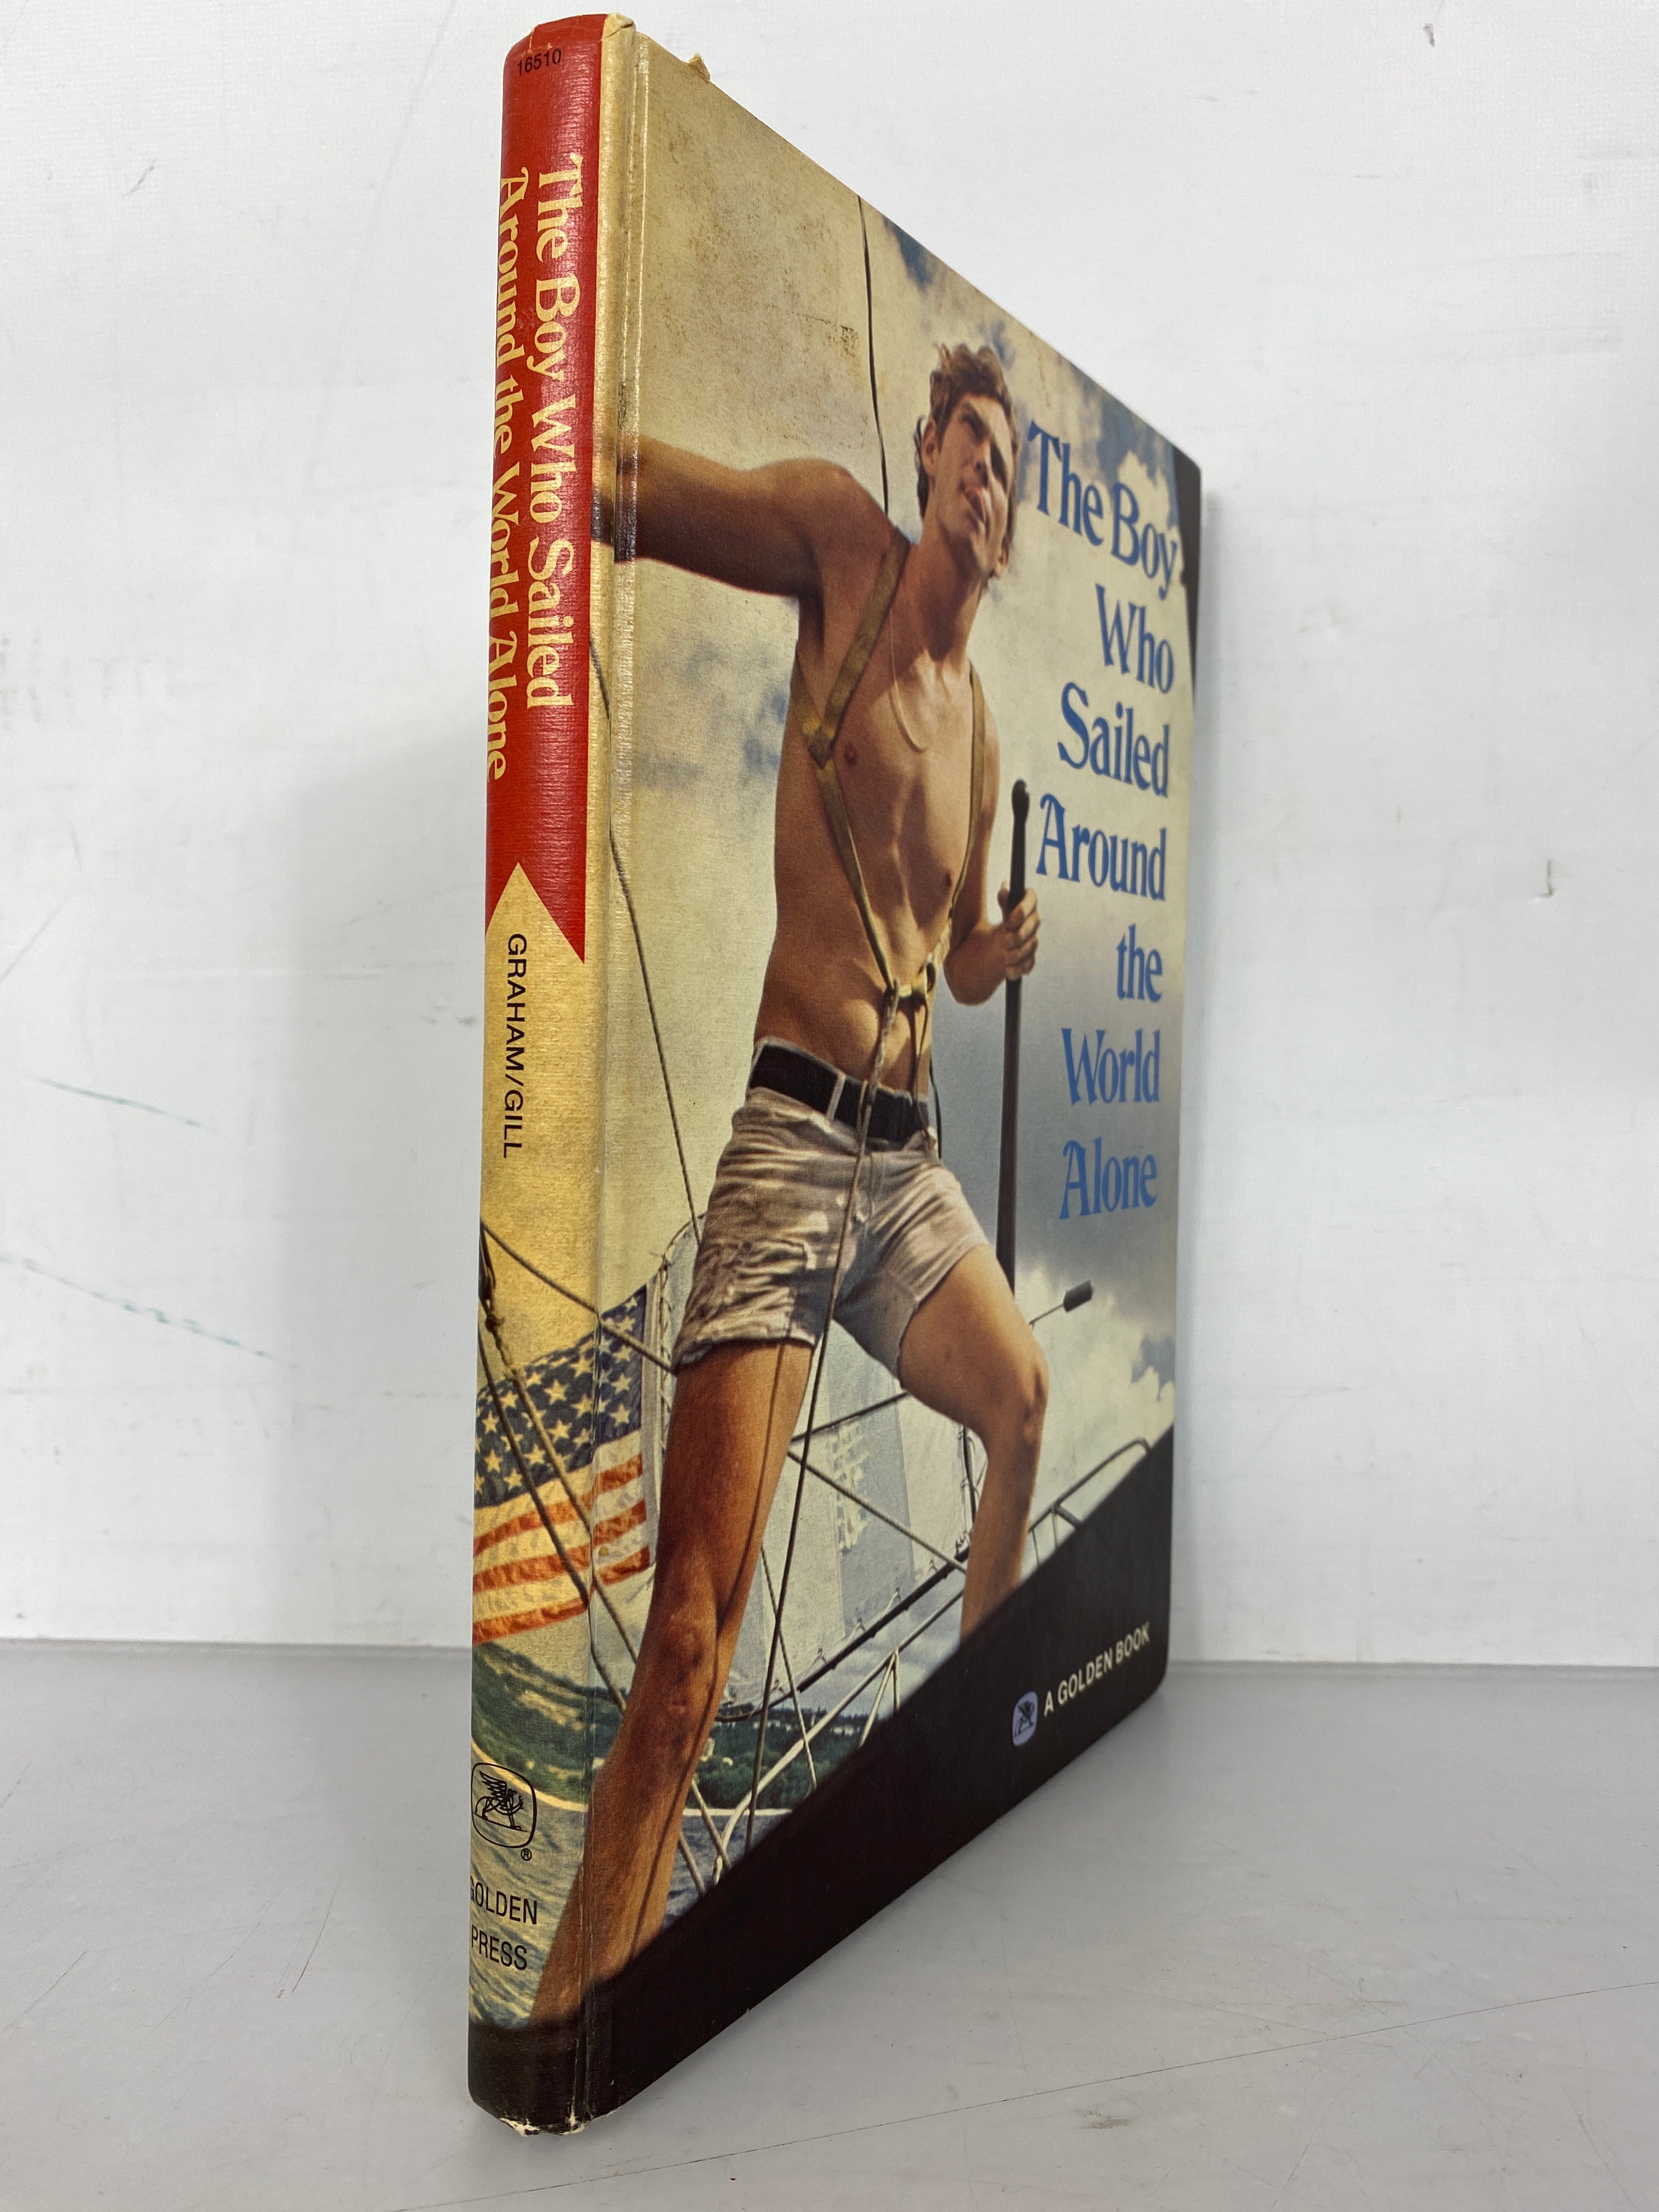 The Boy Who Sailed Around the World Alone by Graham and Gill  Golden Book (1973) HC